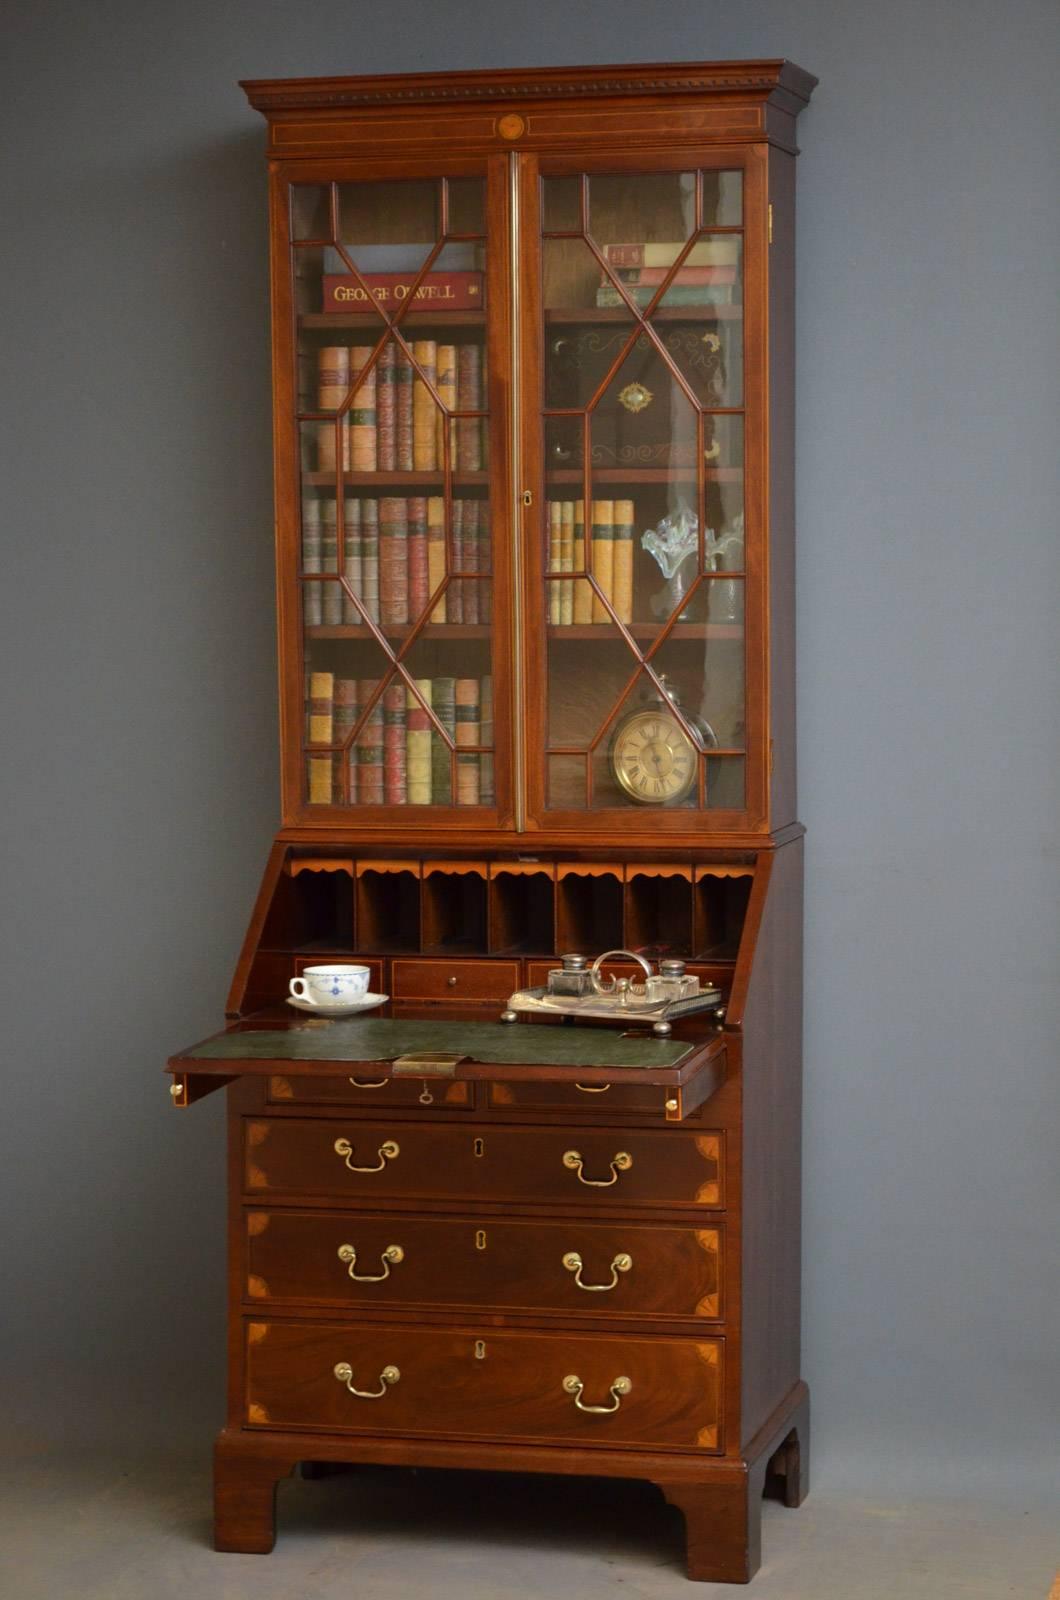 Sn4174 Slim and elegant Georgian mahogany and inlaid bureau bookcase, having dentil cornice and string inlaid frieze above a pair of astragal glazed doors enclosing three height adjustable shelves. The base having neoclassical inlaid fall, which